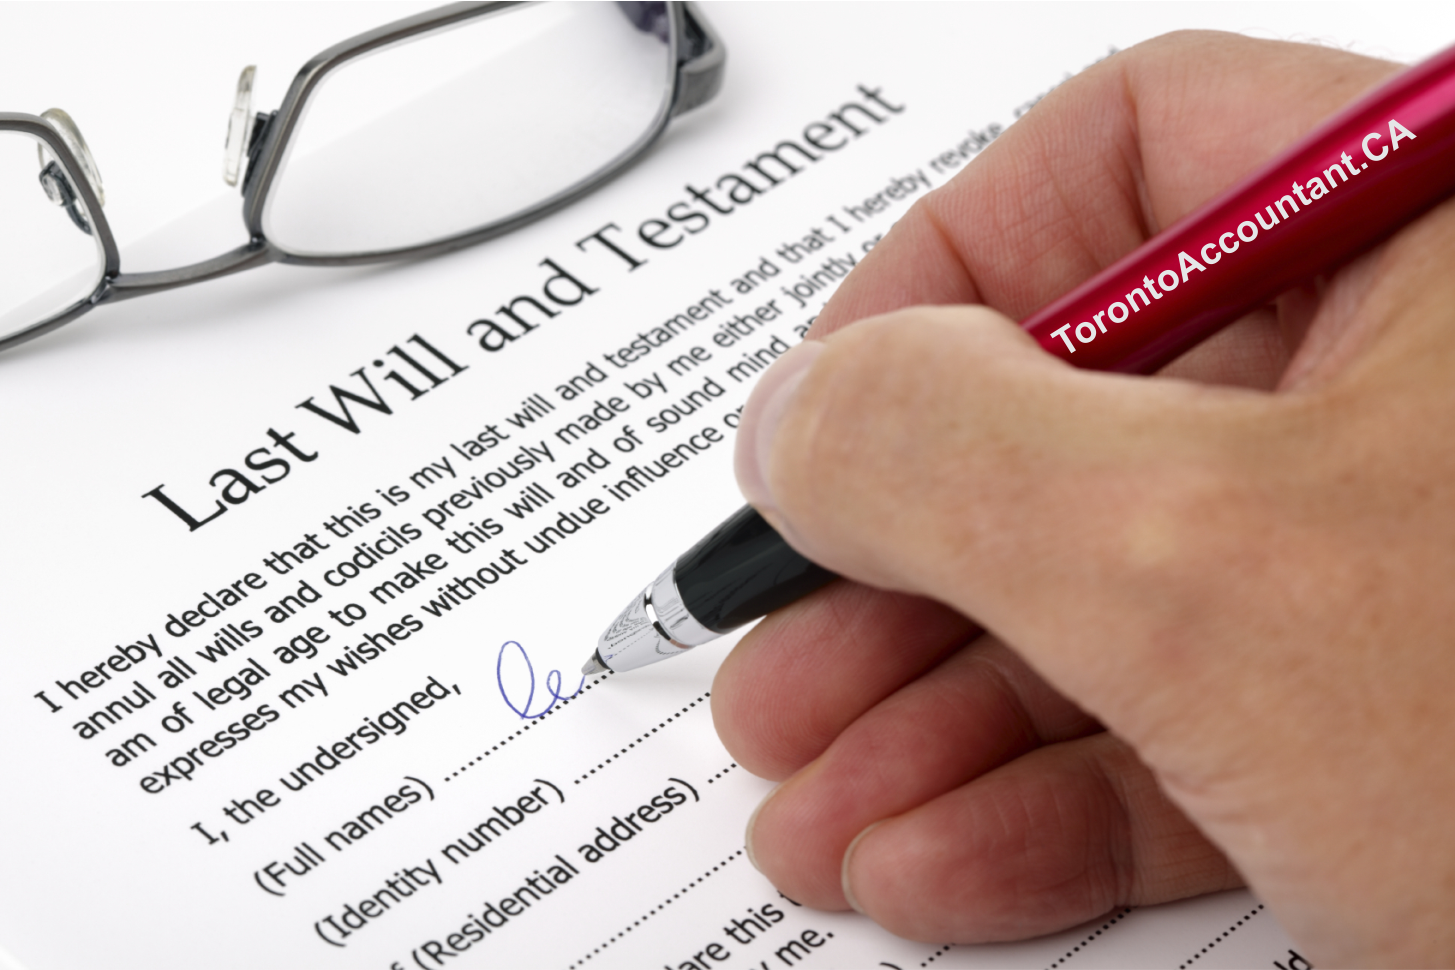 You are currently viewing 5 UNPLEASANT THINGS THE CAN HAPPEN IF YOU DIE WITHOUT A WILL